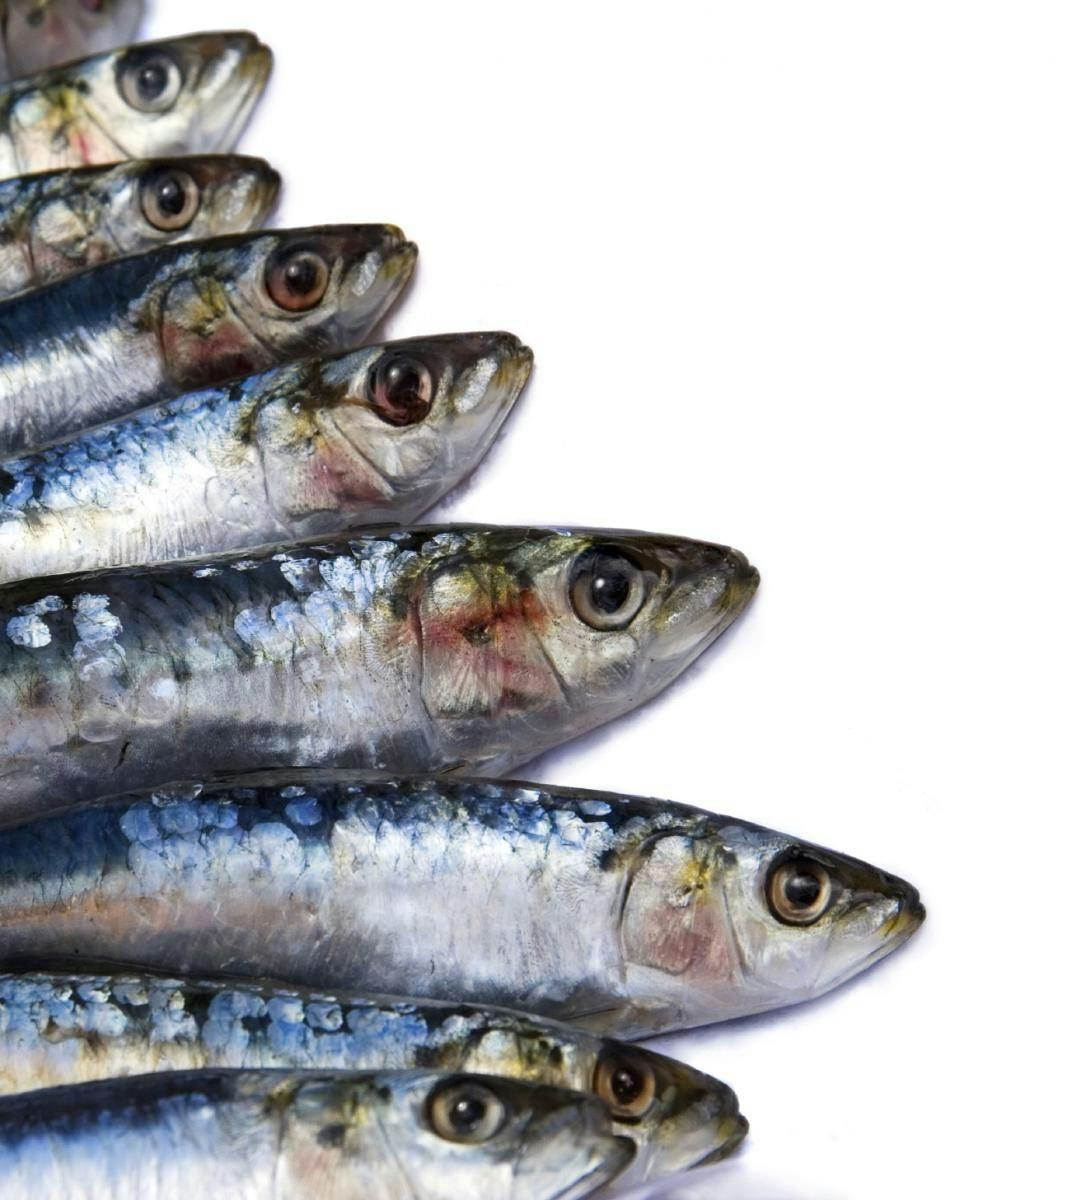 Fatty Fish Intake Cognitive Benefits Mostly Neutral in Preschool Children, Study Suggests